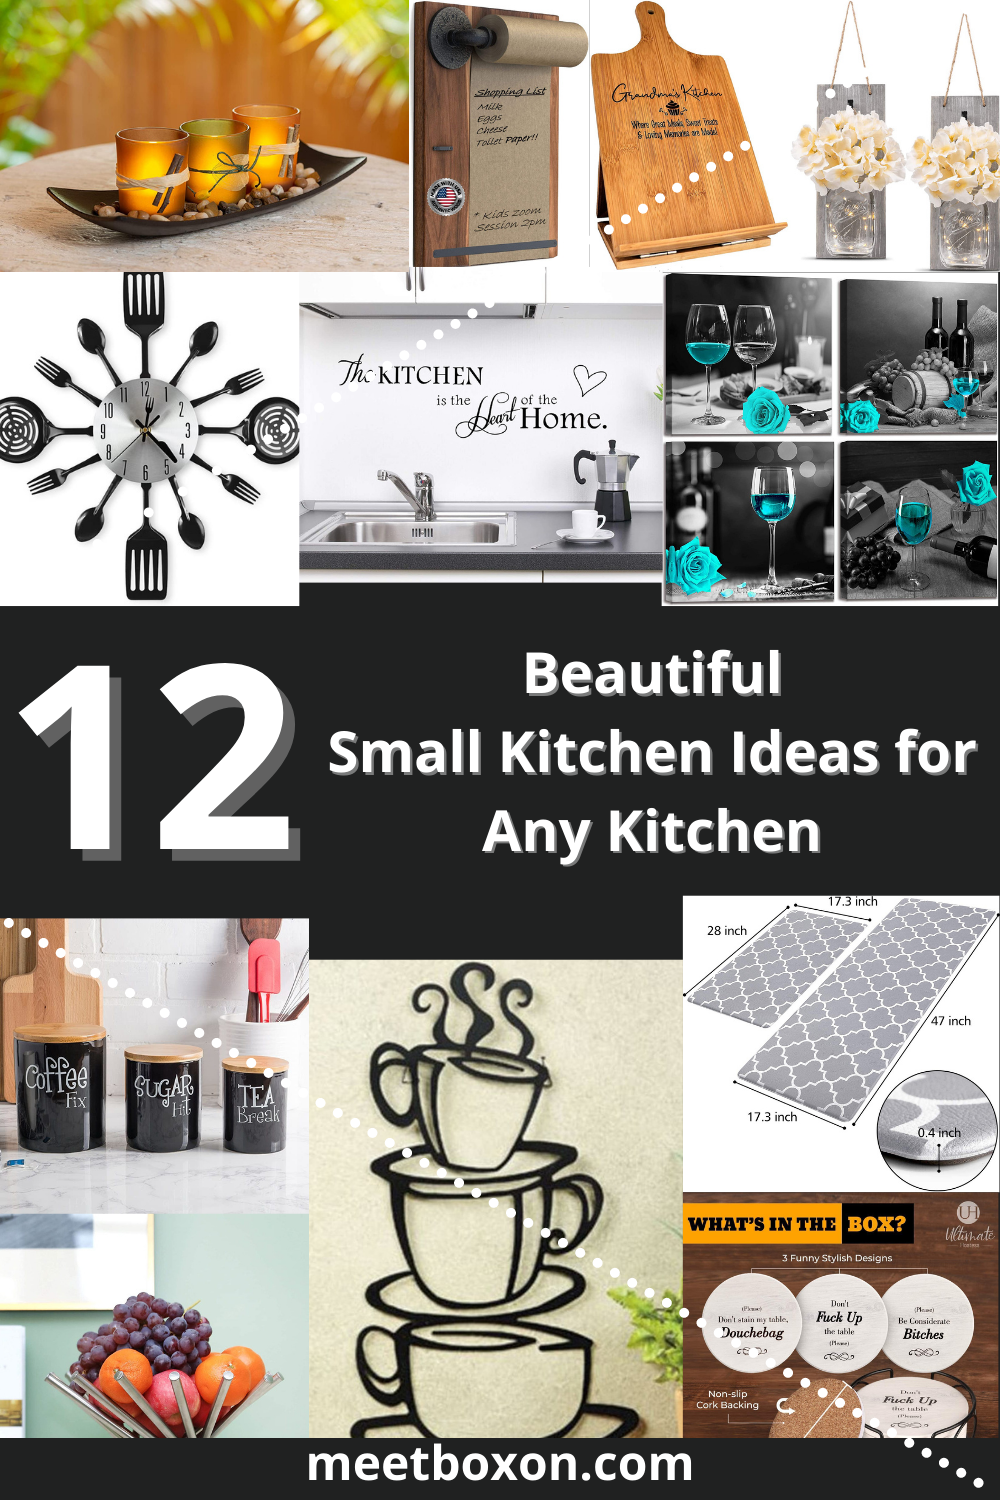 12 Beautiful Small Kitchen Ideas for Any Kitchen